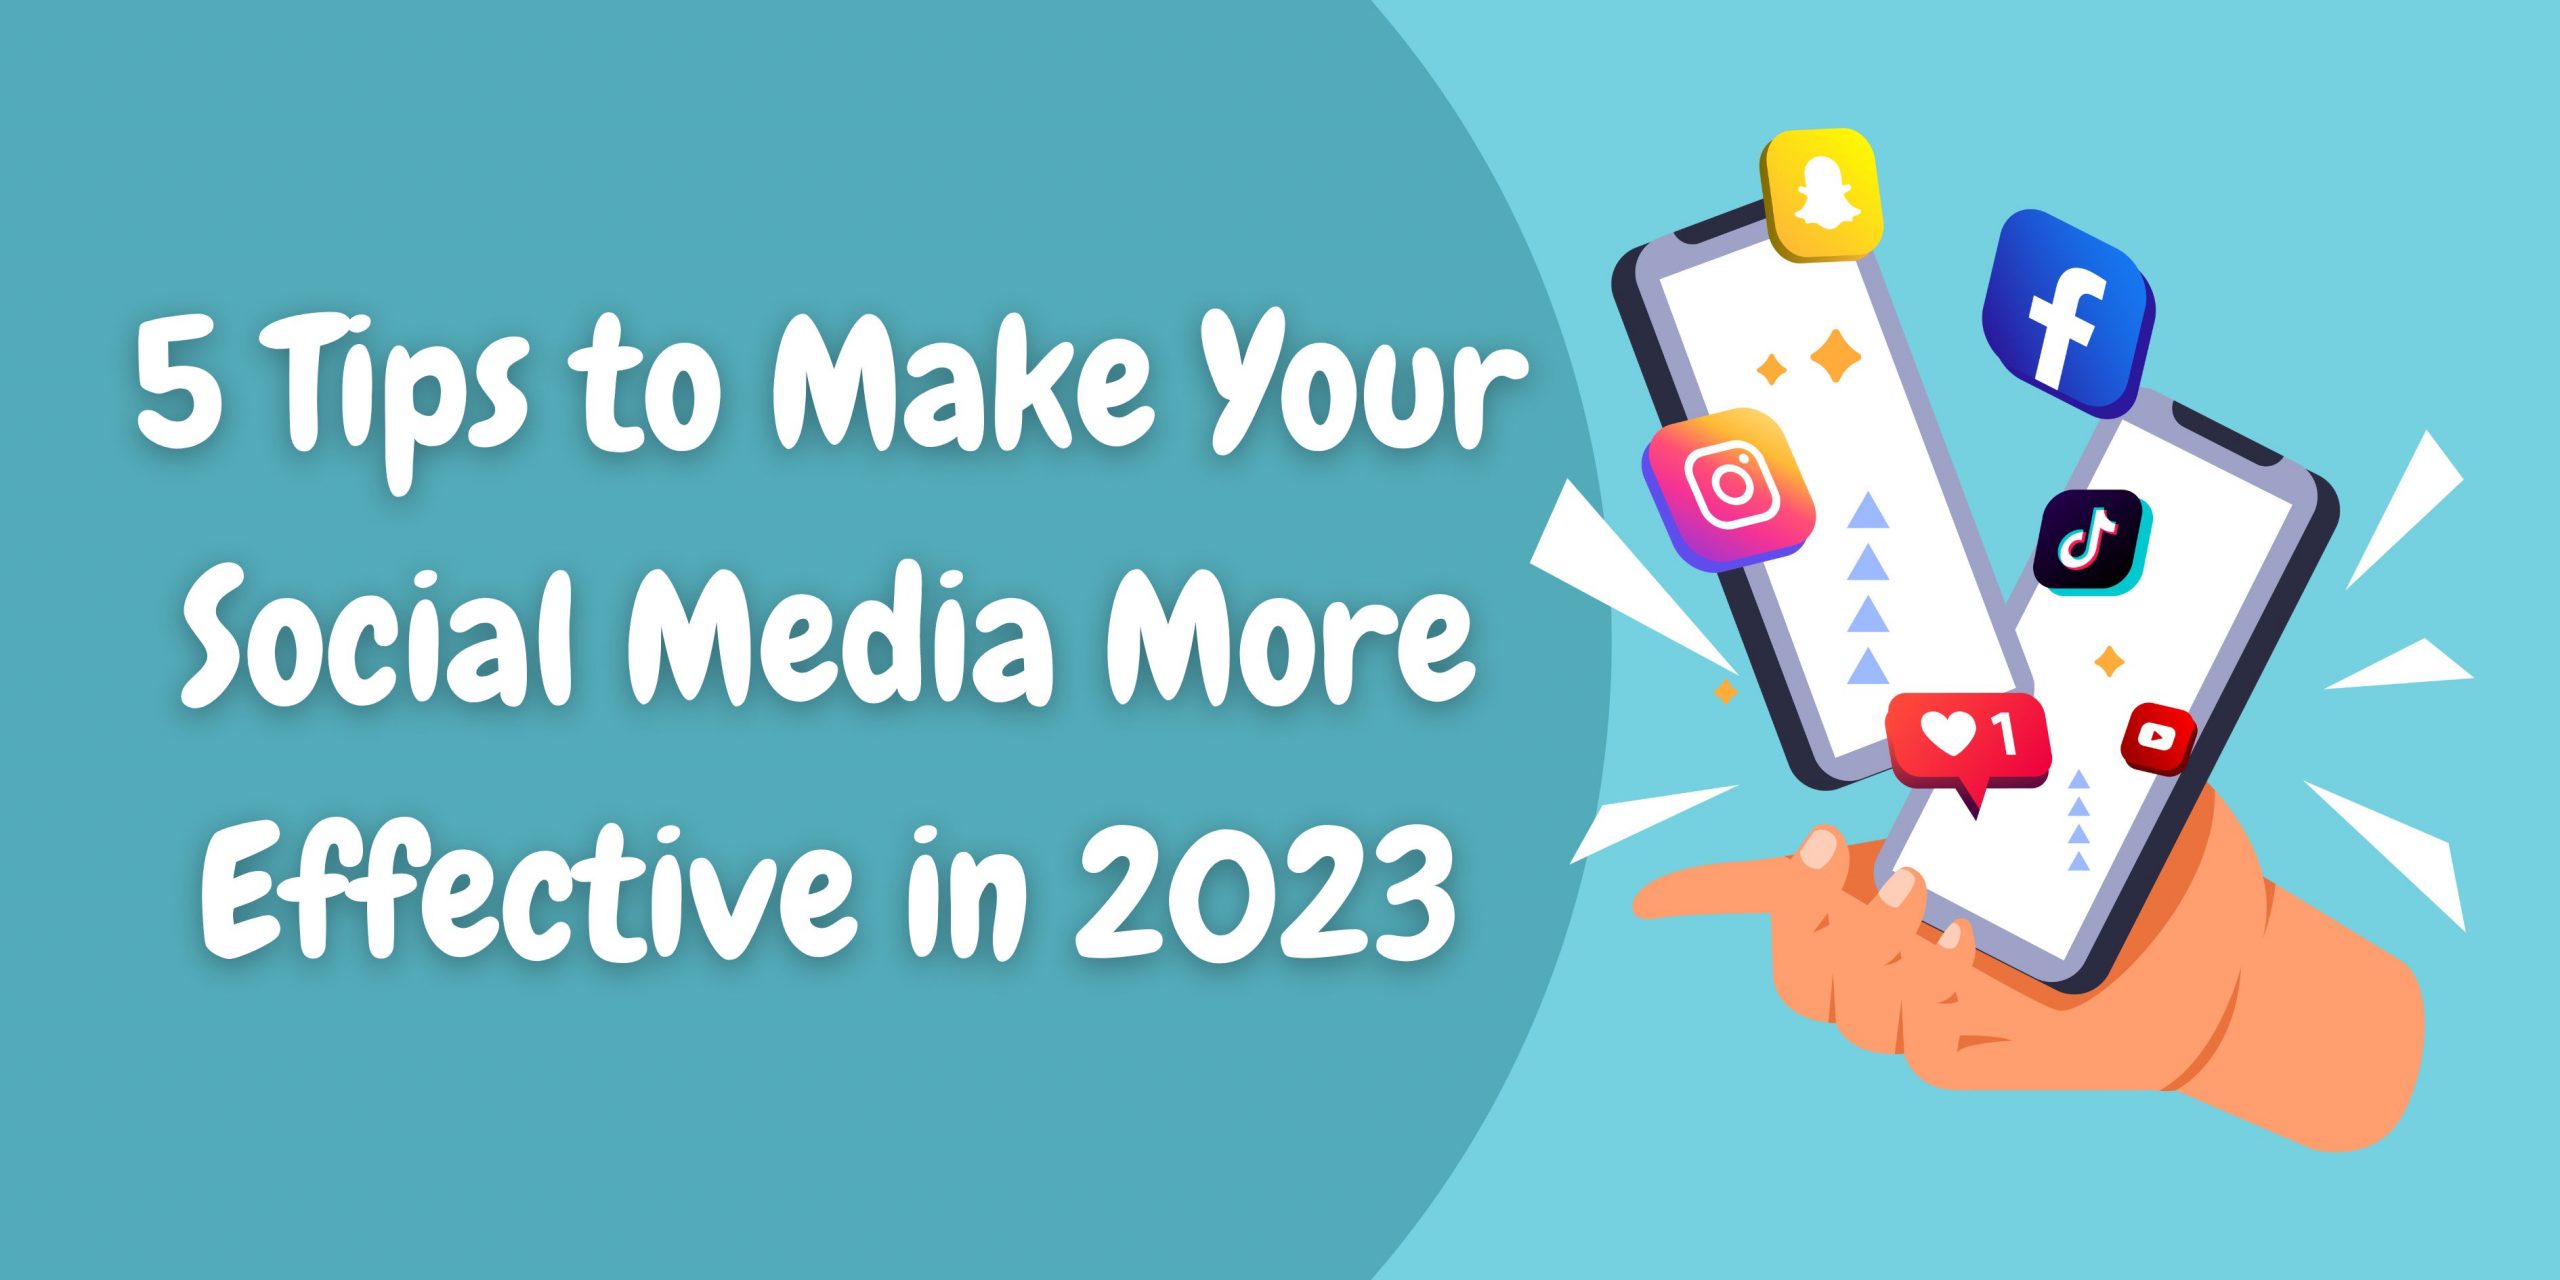 5 Tips to make your social media more effective in 2023